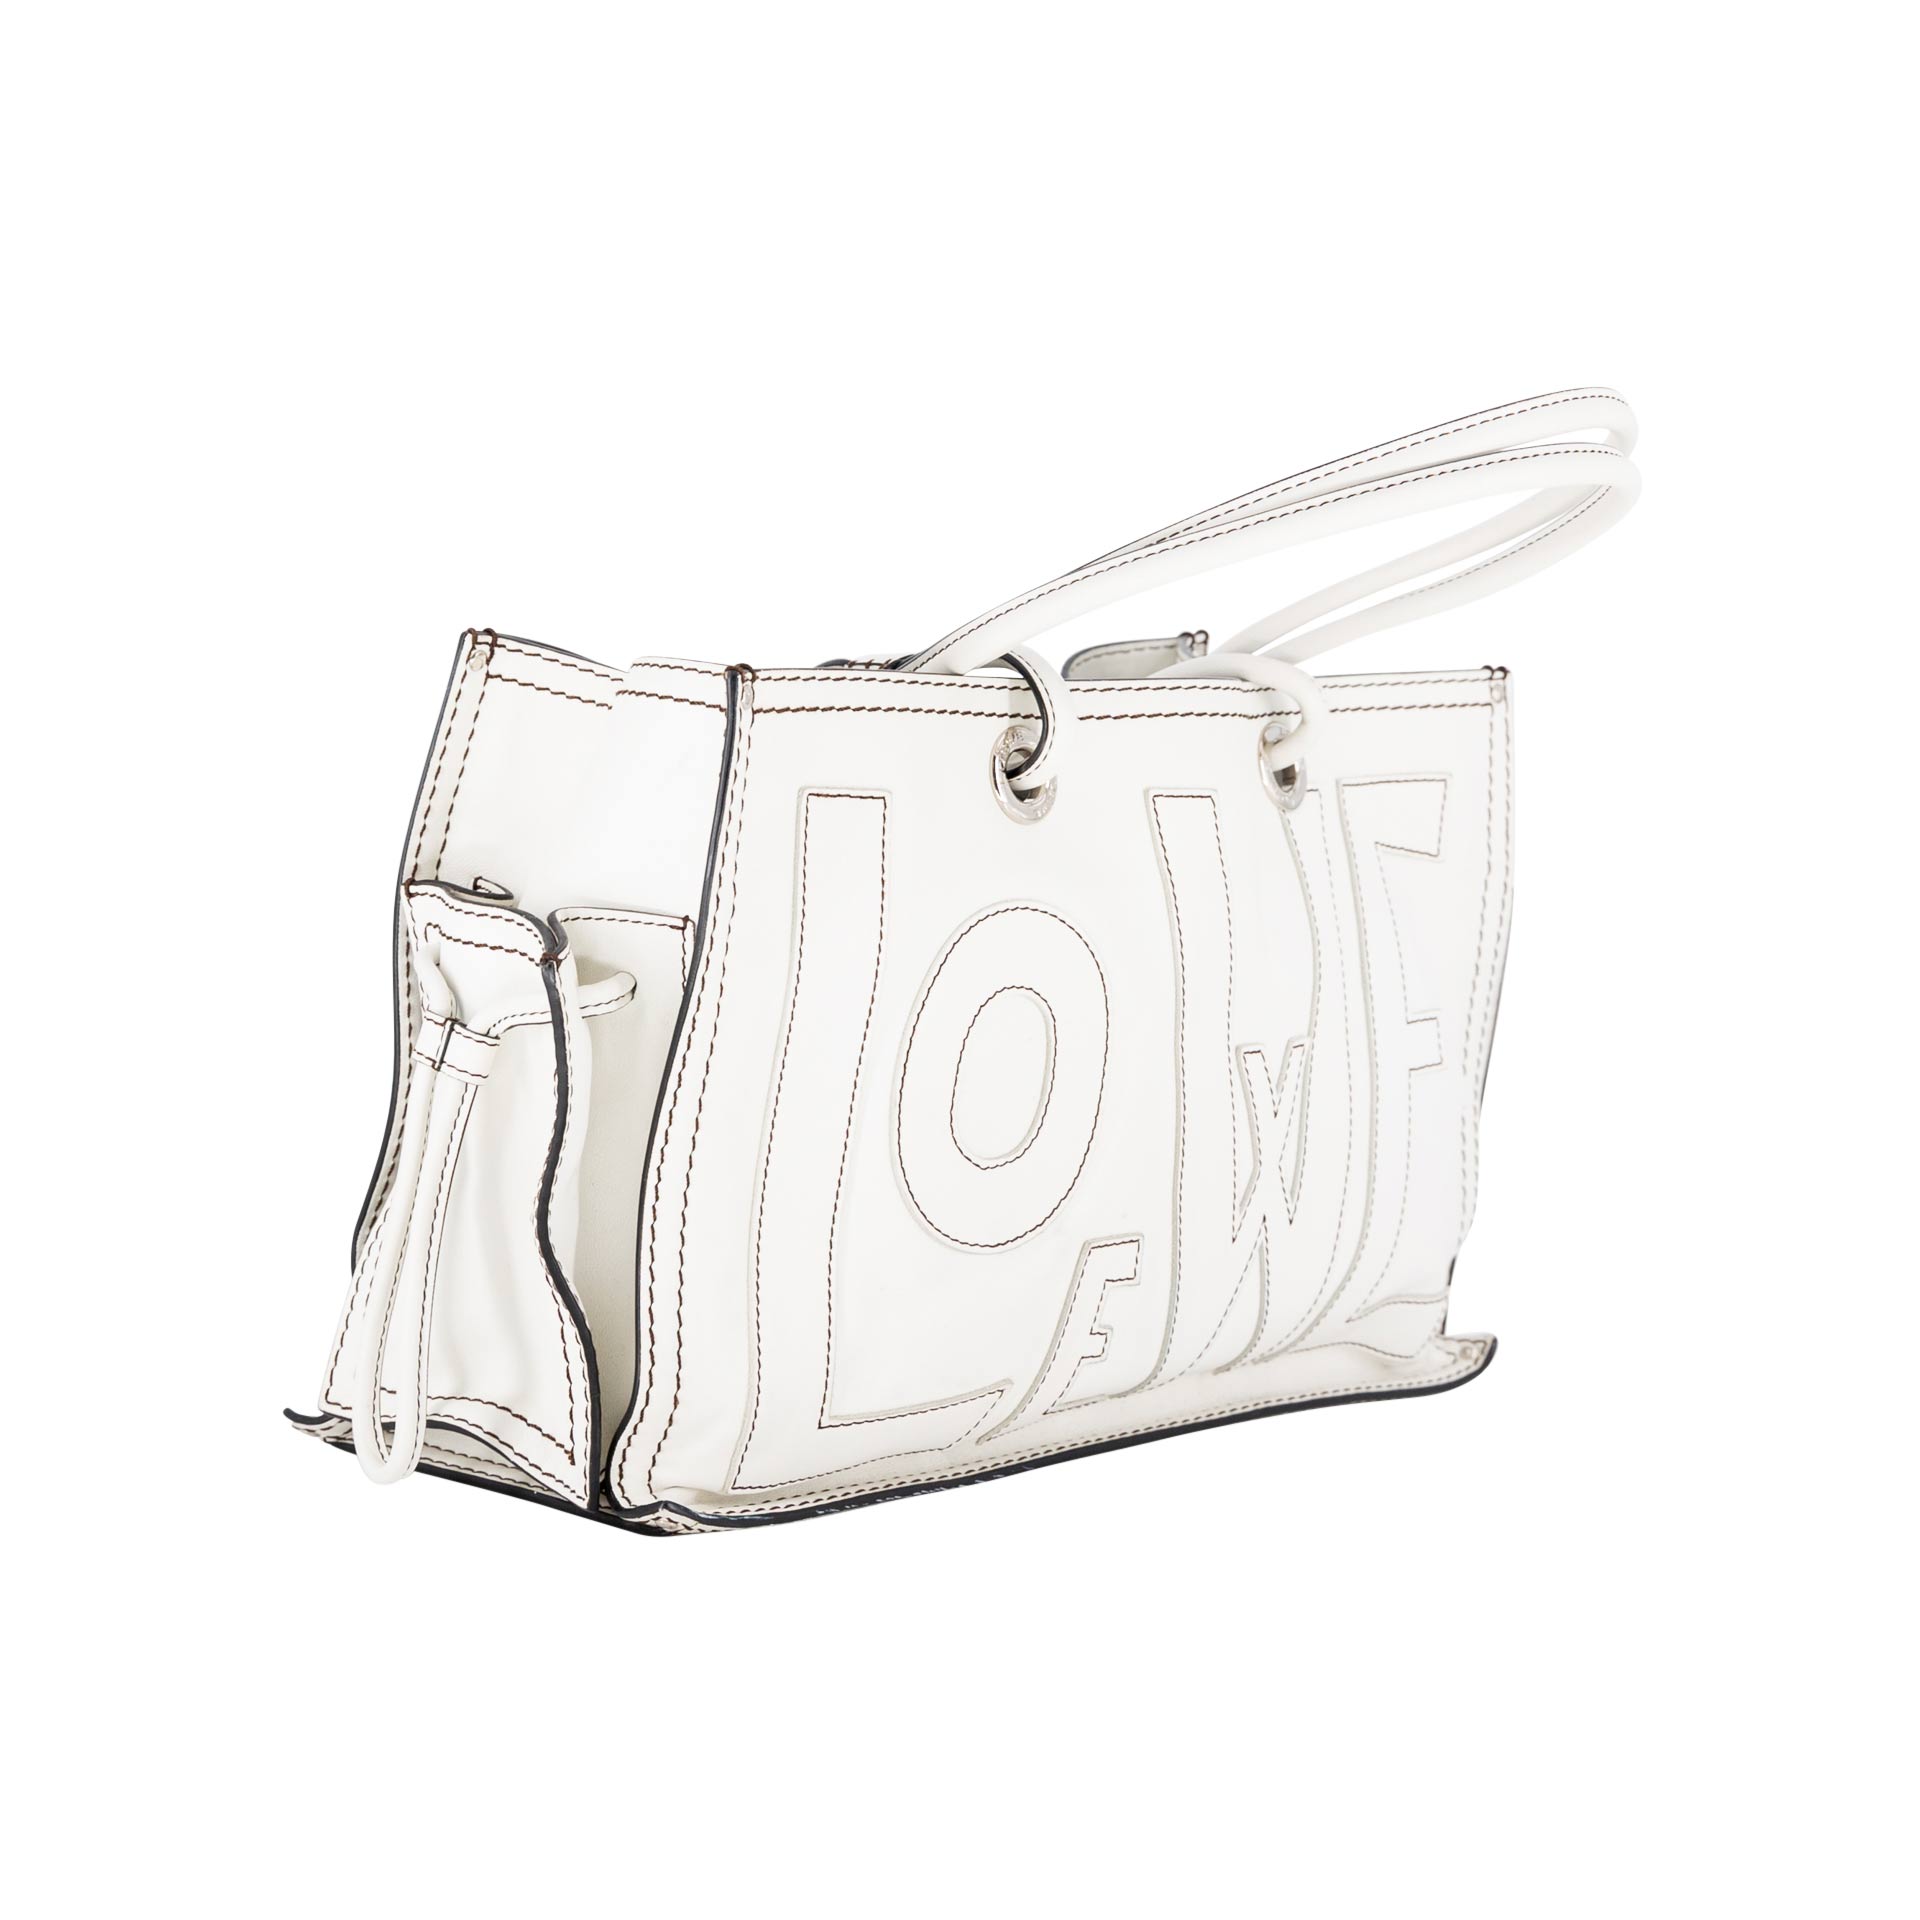 Loewe vintage logo tote bag in cream leather with stitched brand-name & logo  - DOWNTOWN UPTOWN Genève